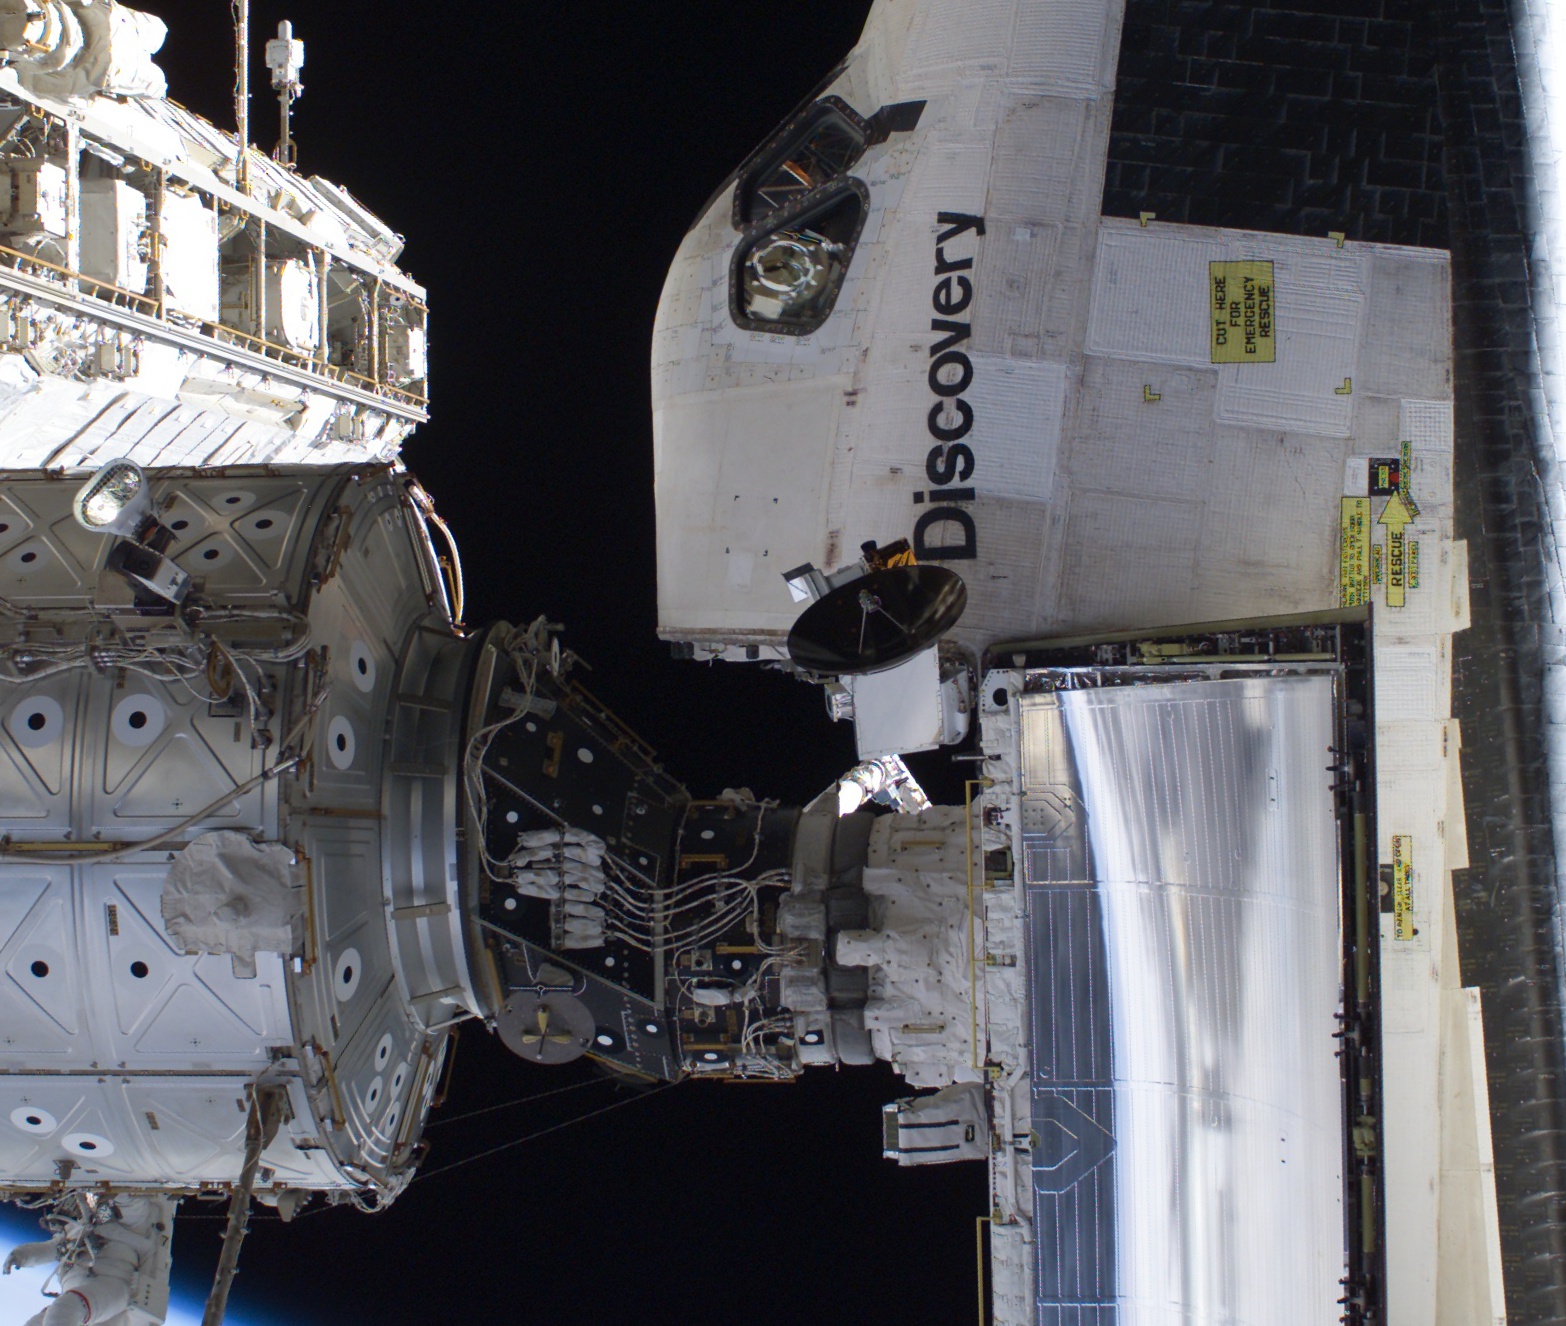 Shuttle docked at ISS via the PMA. Note the orientation dots affixed to the ISS, and the shuttle’s rendezvous radar dish next to name. (NASA archive image)